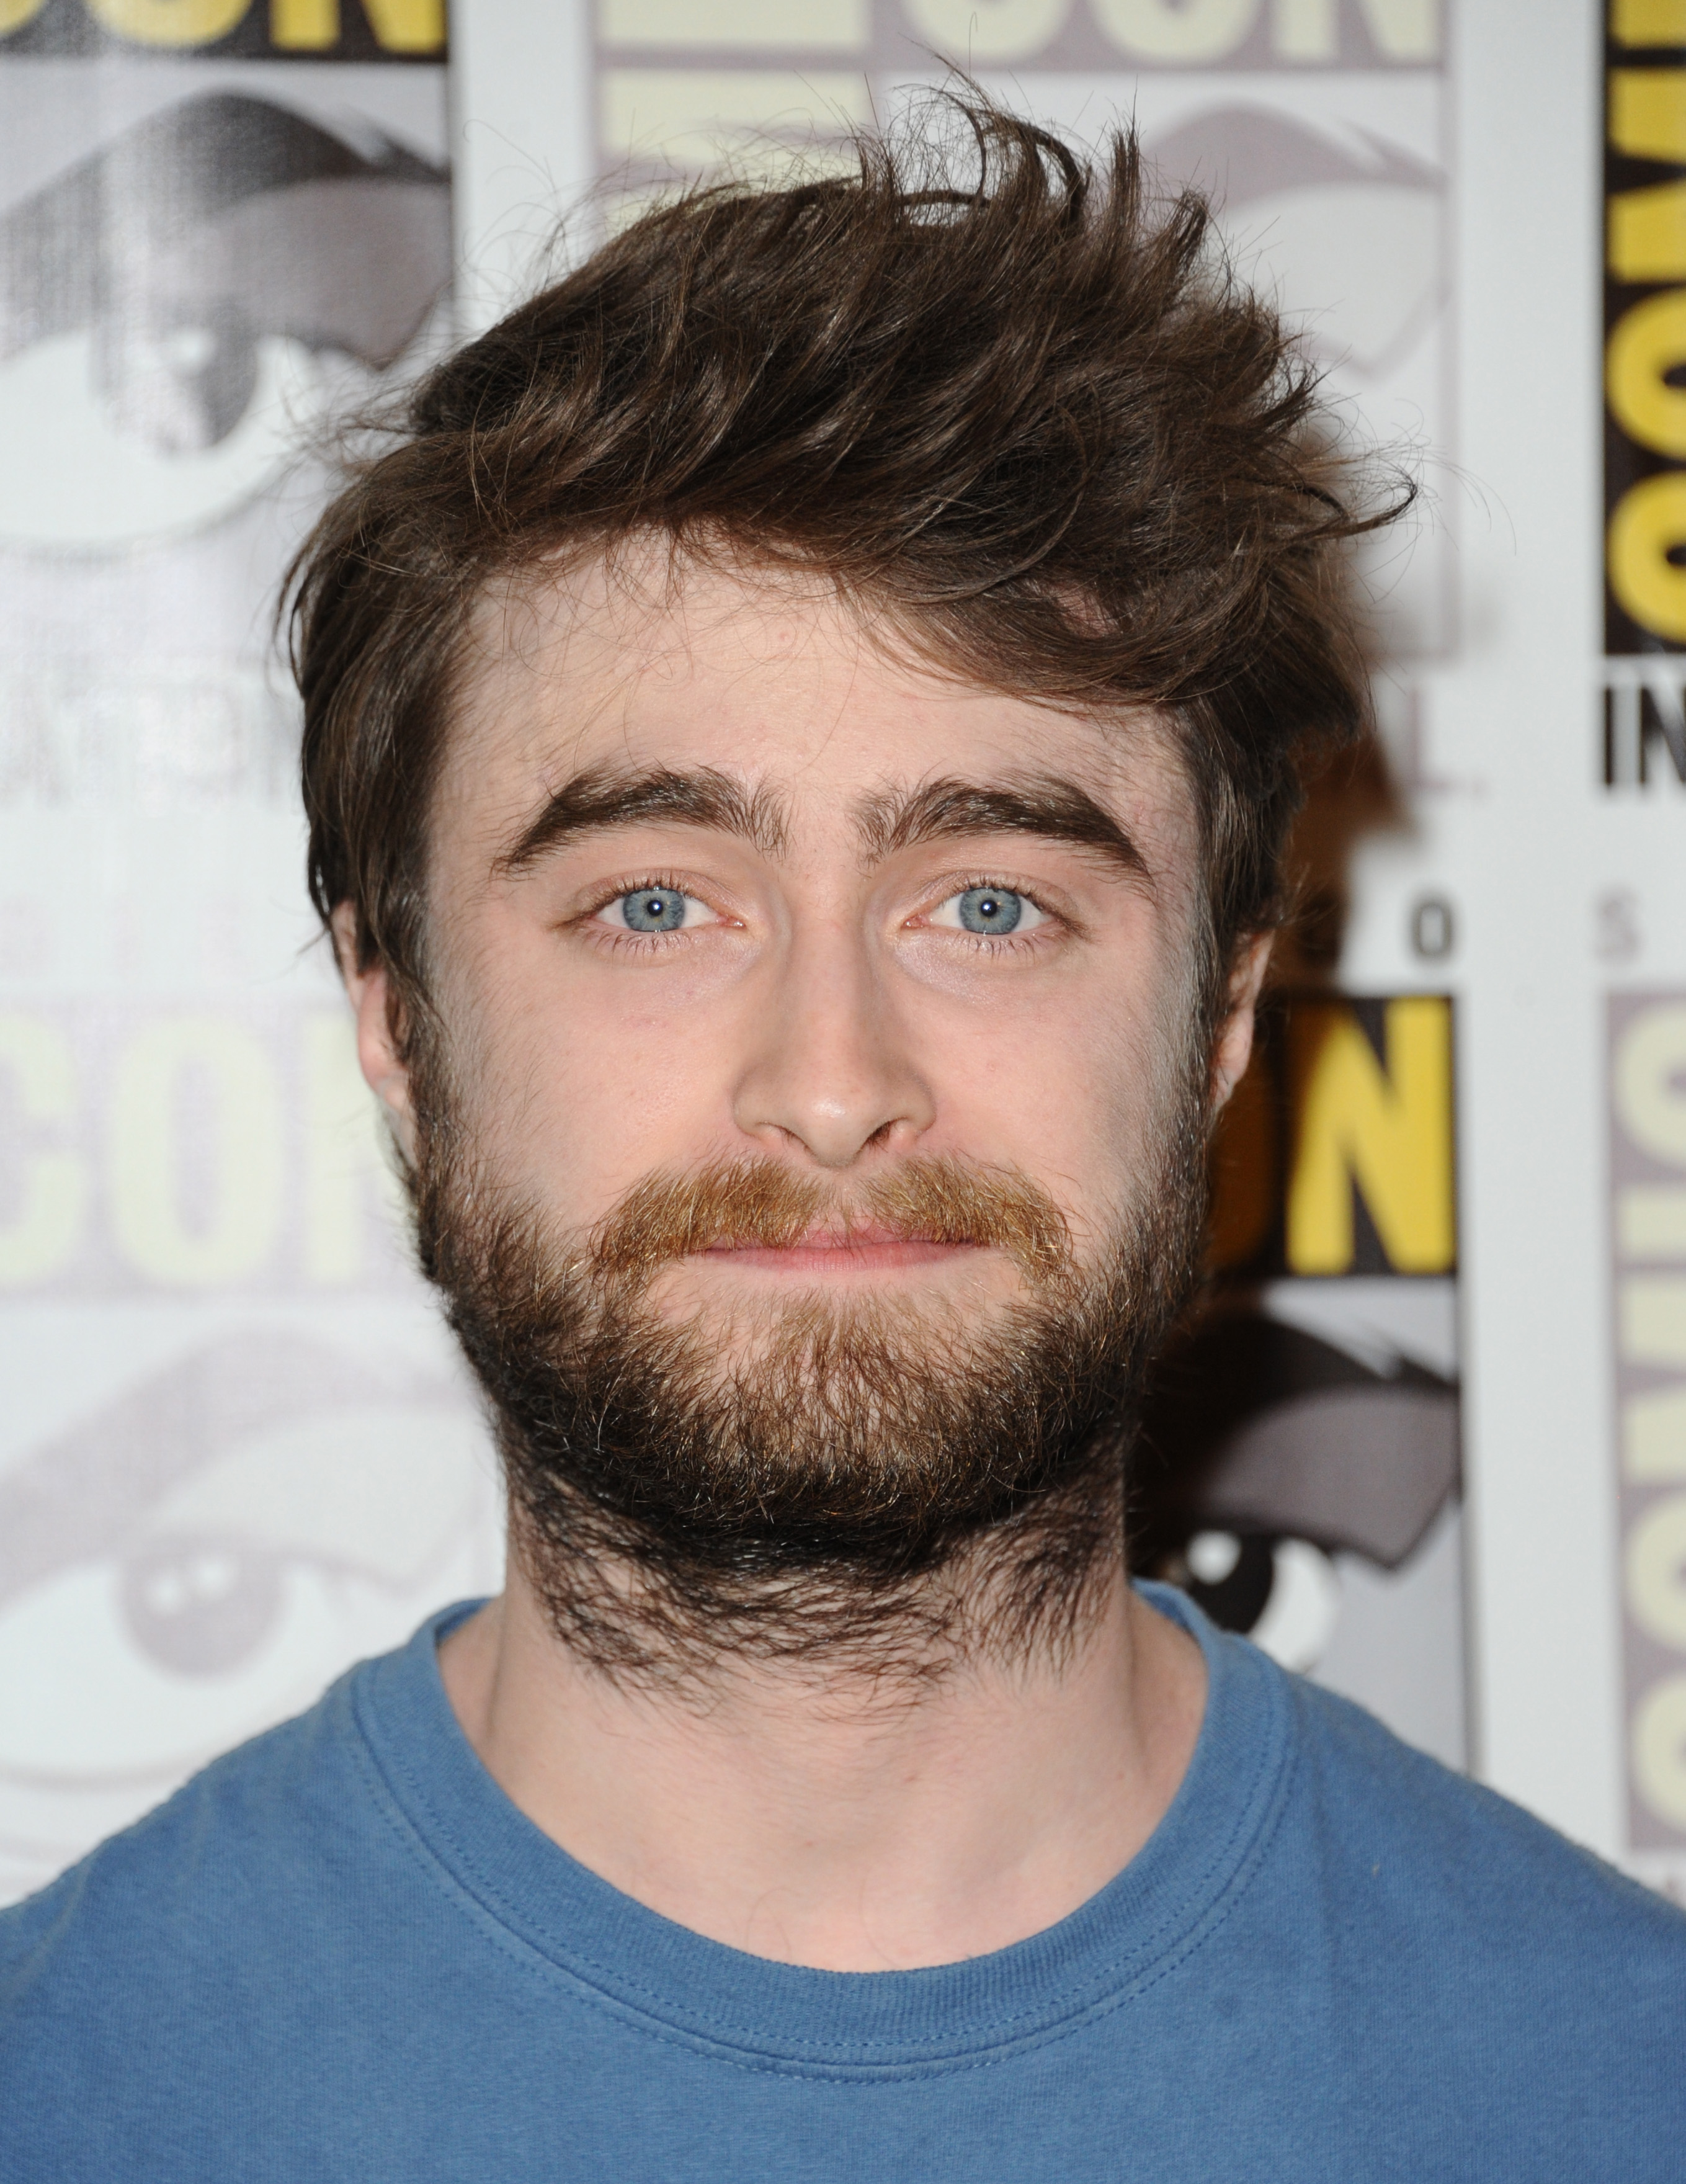 Daniel Radcliffe at Comic-Con International in San Diego on July 11, 2015. (Richard Shotwell—Invision/AP)